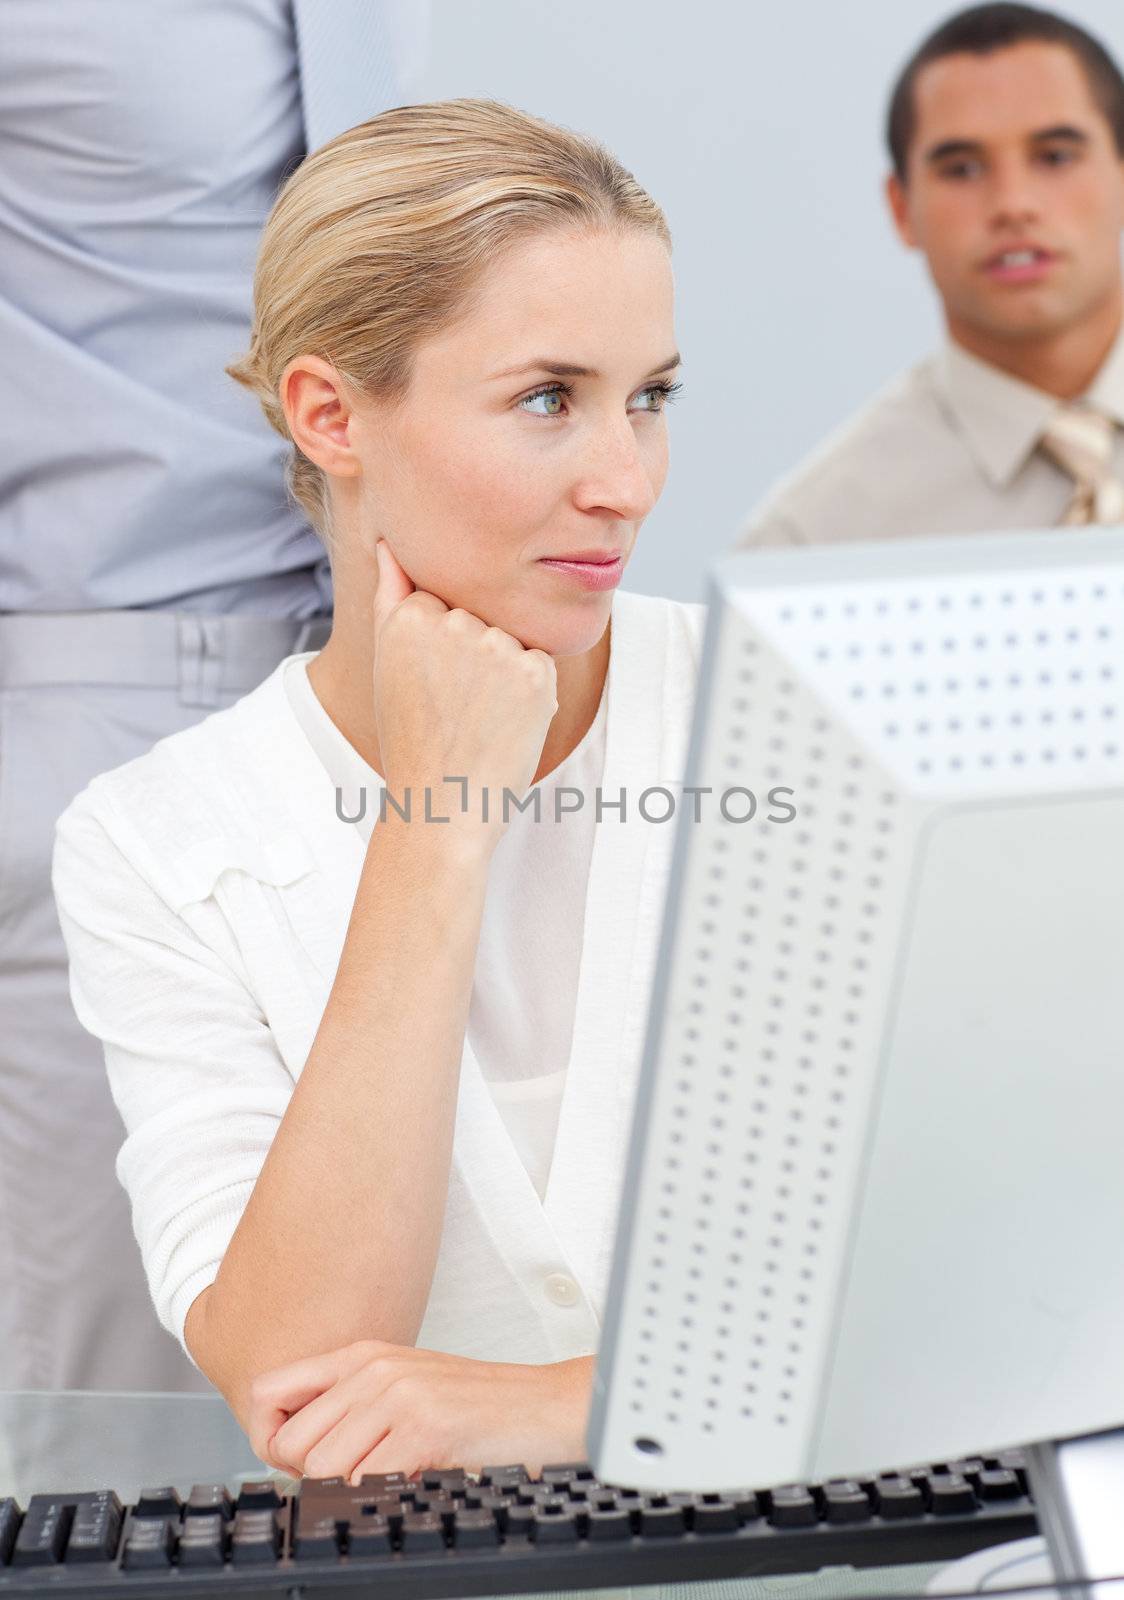 Pensive blond woman working at a computer in the office